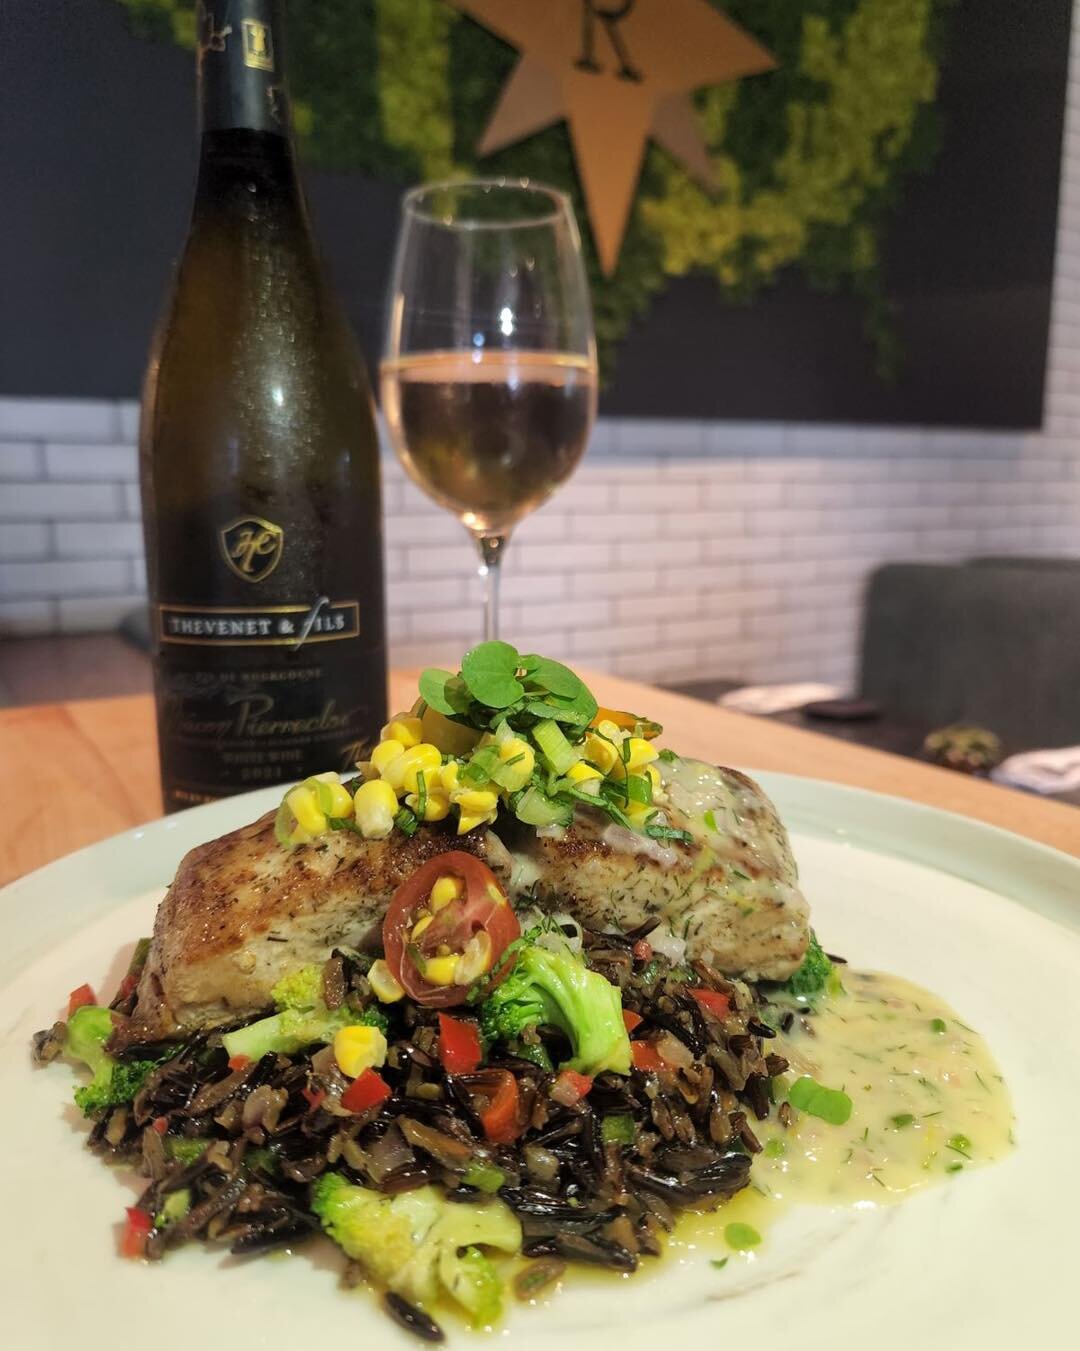 No need to step outside and grill dinner tonight - we&rsquo;ve got you covered!! 😎☀️ 

👉🏼 Redfish with lemon herb butter, tomato corn relish, and wild rice pilaf 

🍷 Paired with the Thevenet &amp; Fils Macon Pierreclos White Wine - cheers!

#toni